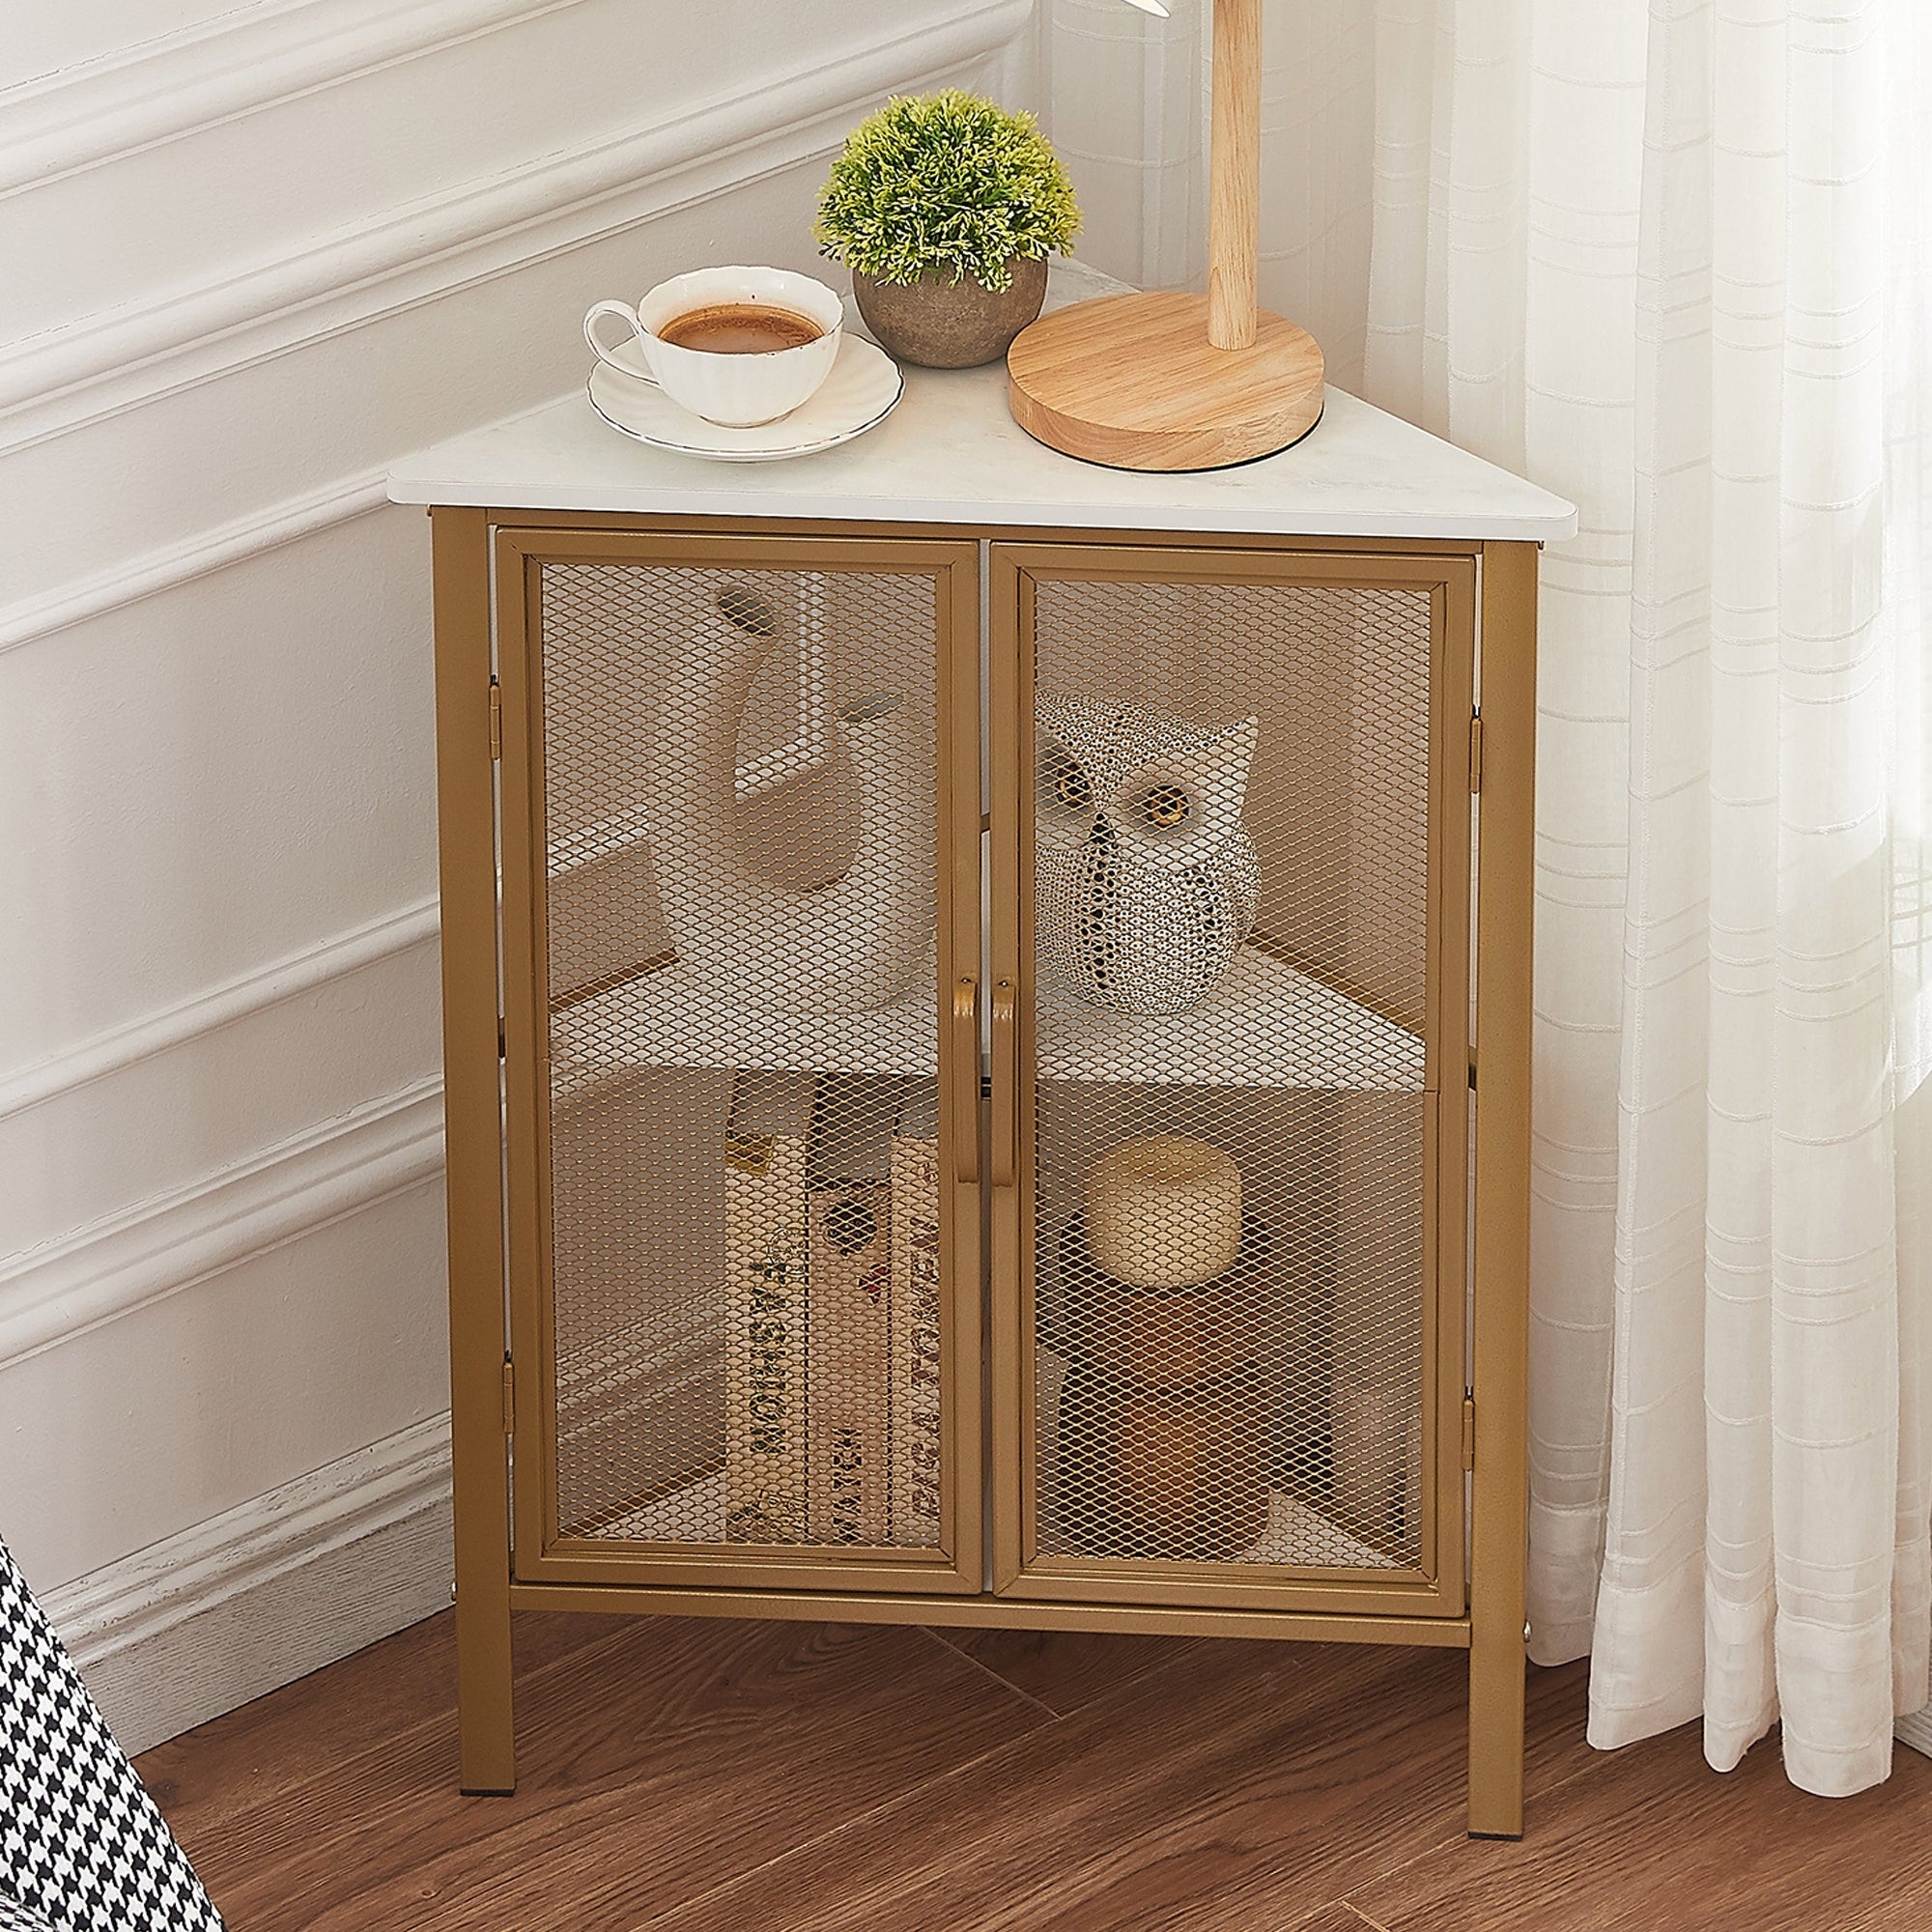 https://ak1.ostkcdn.com/images/products/is/images/direct/fdfdab2e2439360c076e25d901f47c9744227608/VECELO%2C-Triangular-Corner-Cabinet-with-3-tier-Storage-Shelves-For-Small-Spaces%281PCS-2PCS%29.jpg